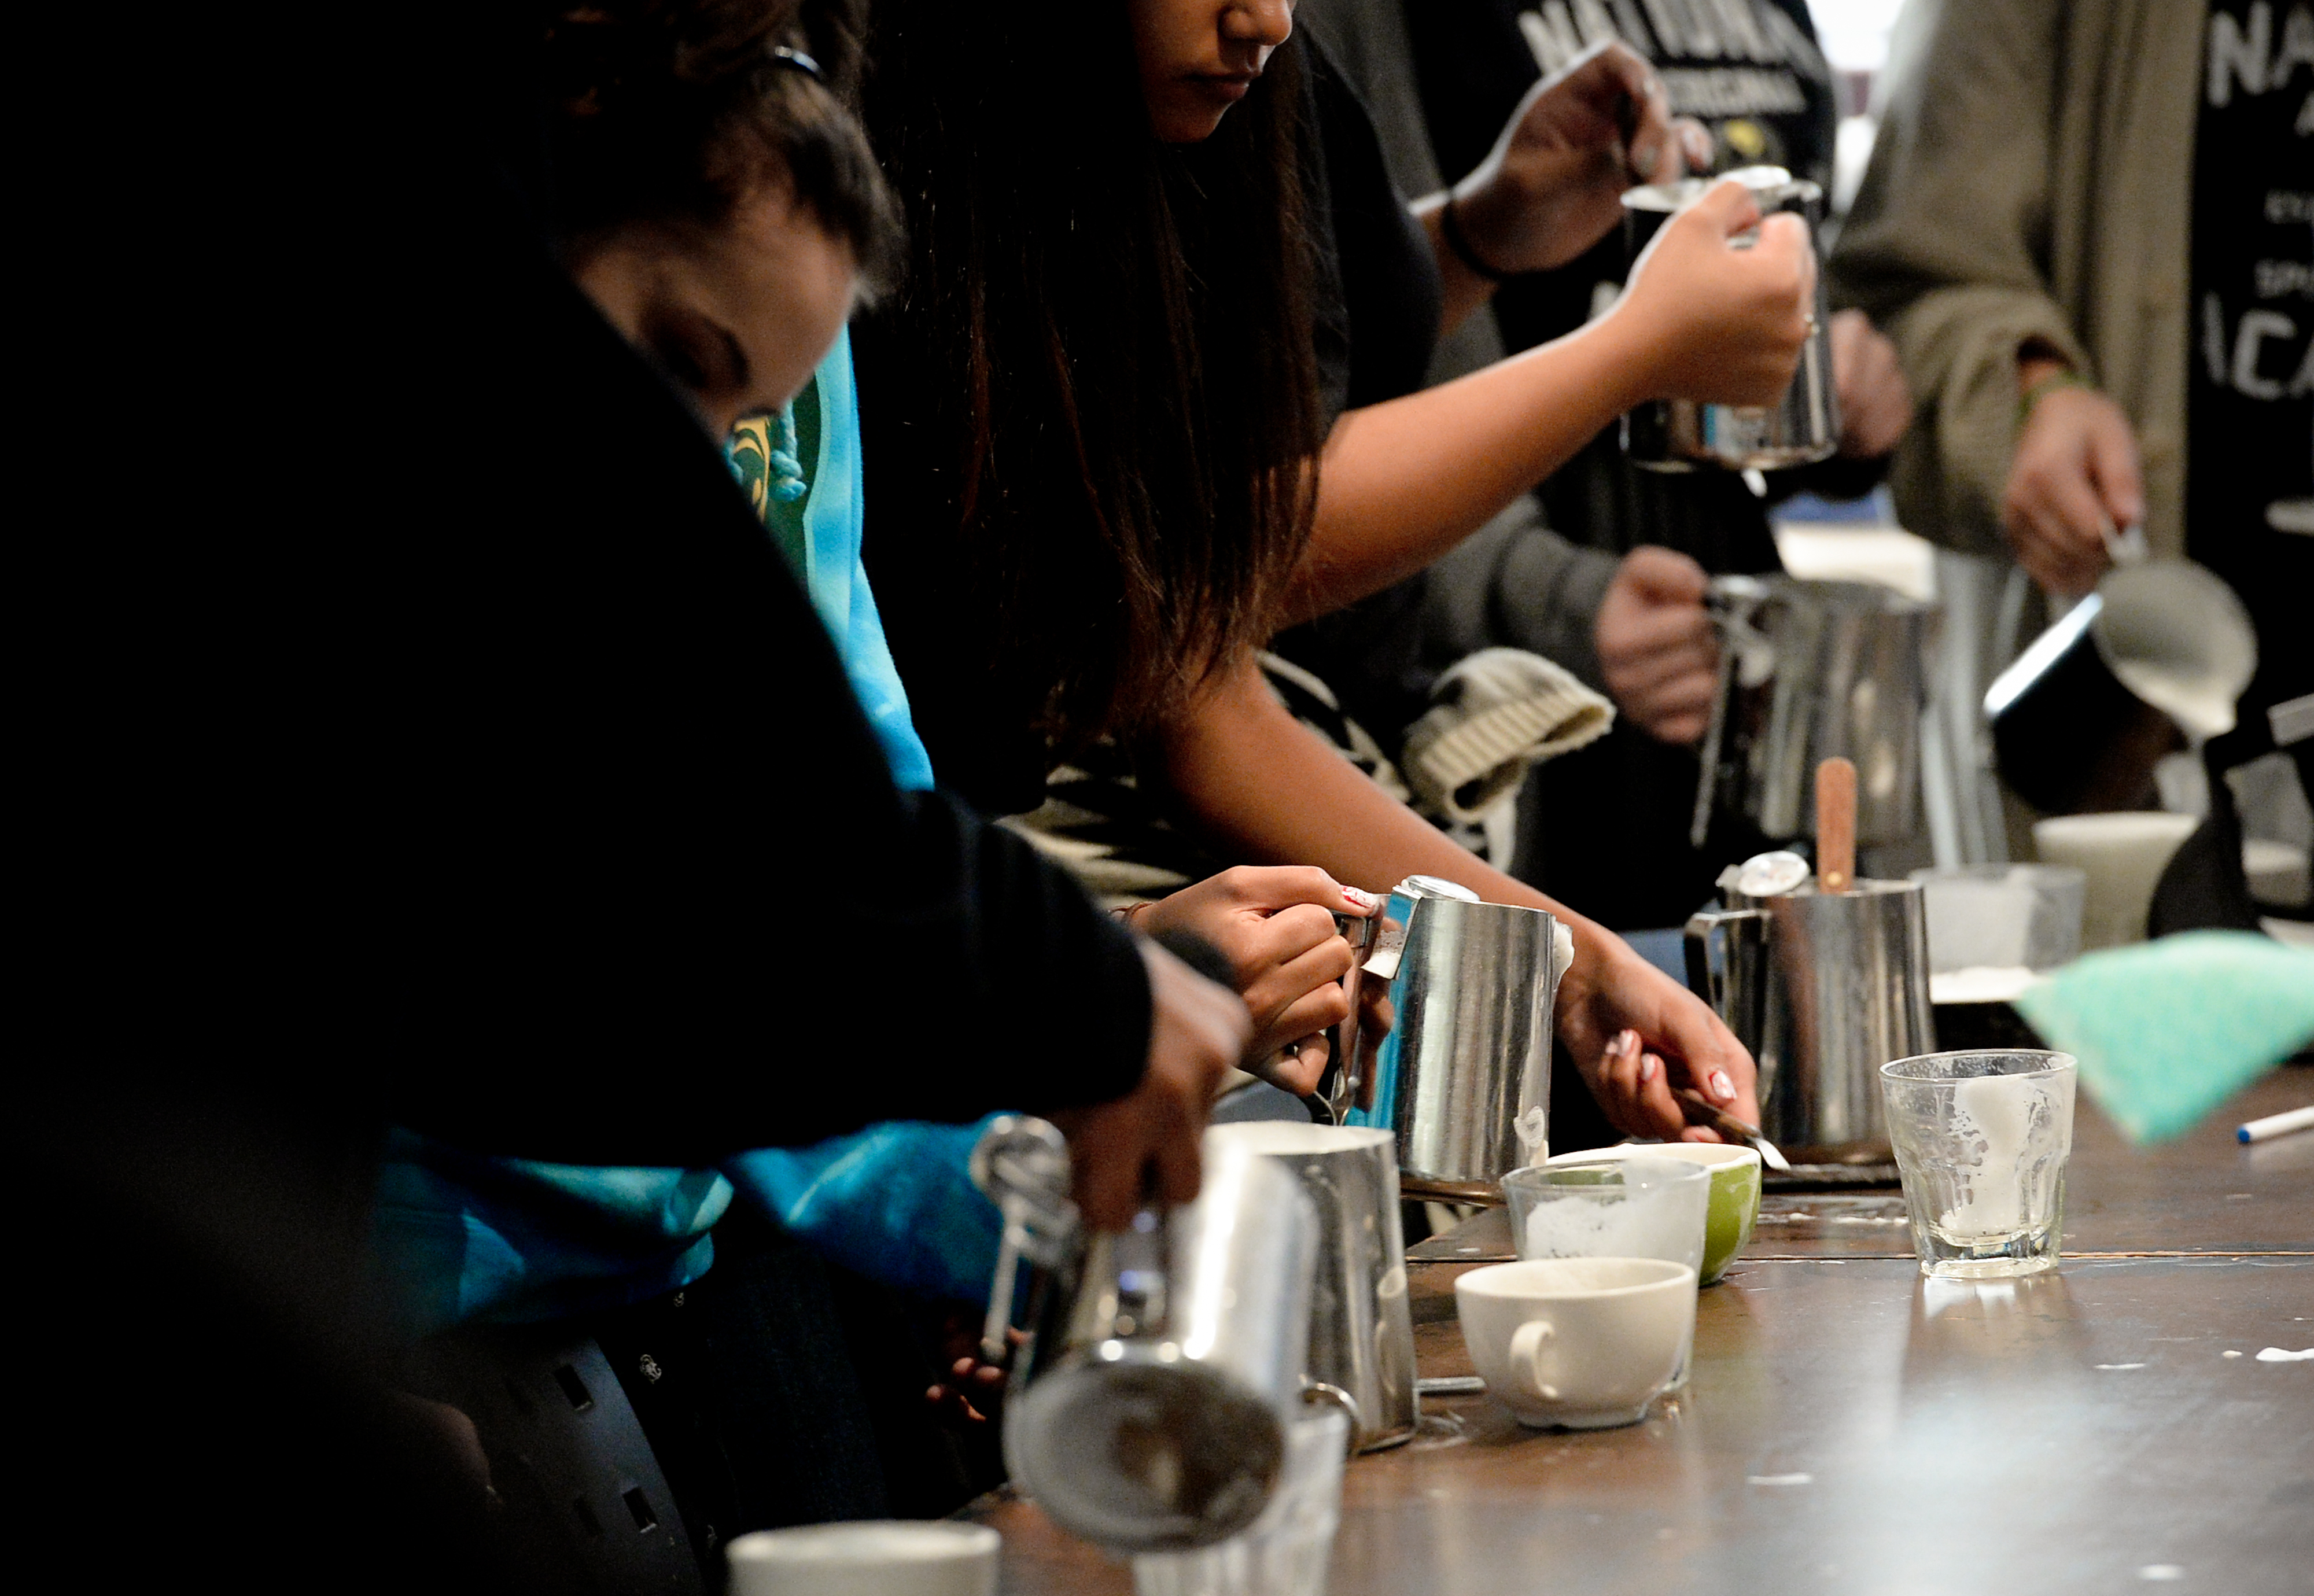 Students undergo training at a Barista Basics class in Sydney. Photographer: Jeremy Piper/Bloomberg
